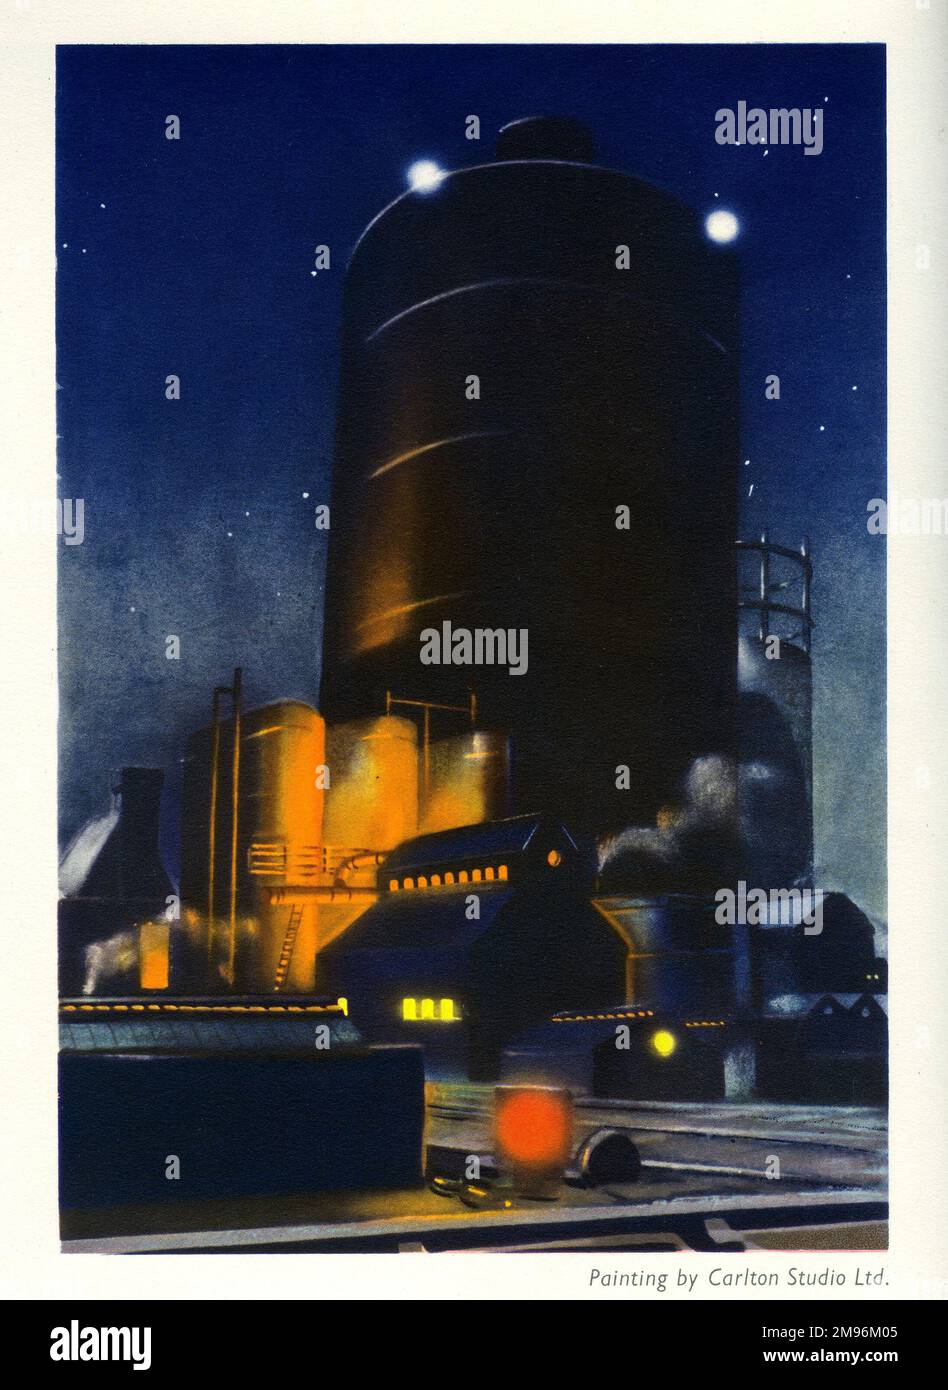 Print User's Yearbook -- a factory scene by night. Stock Photo